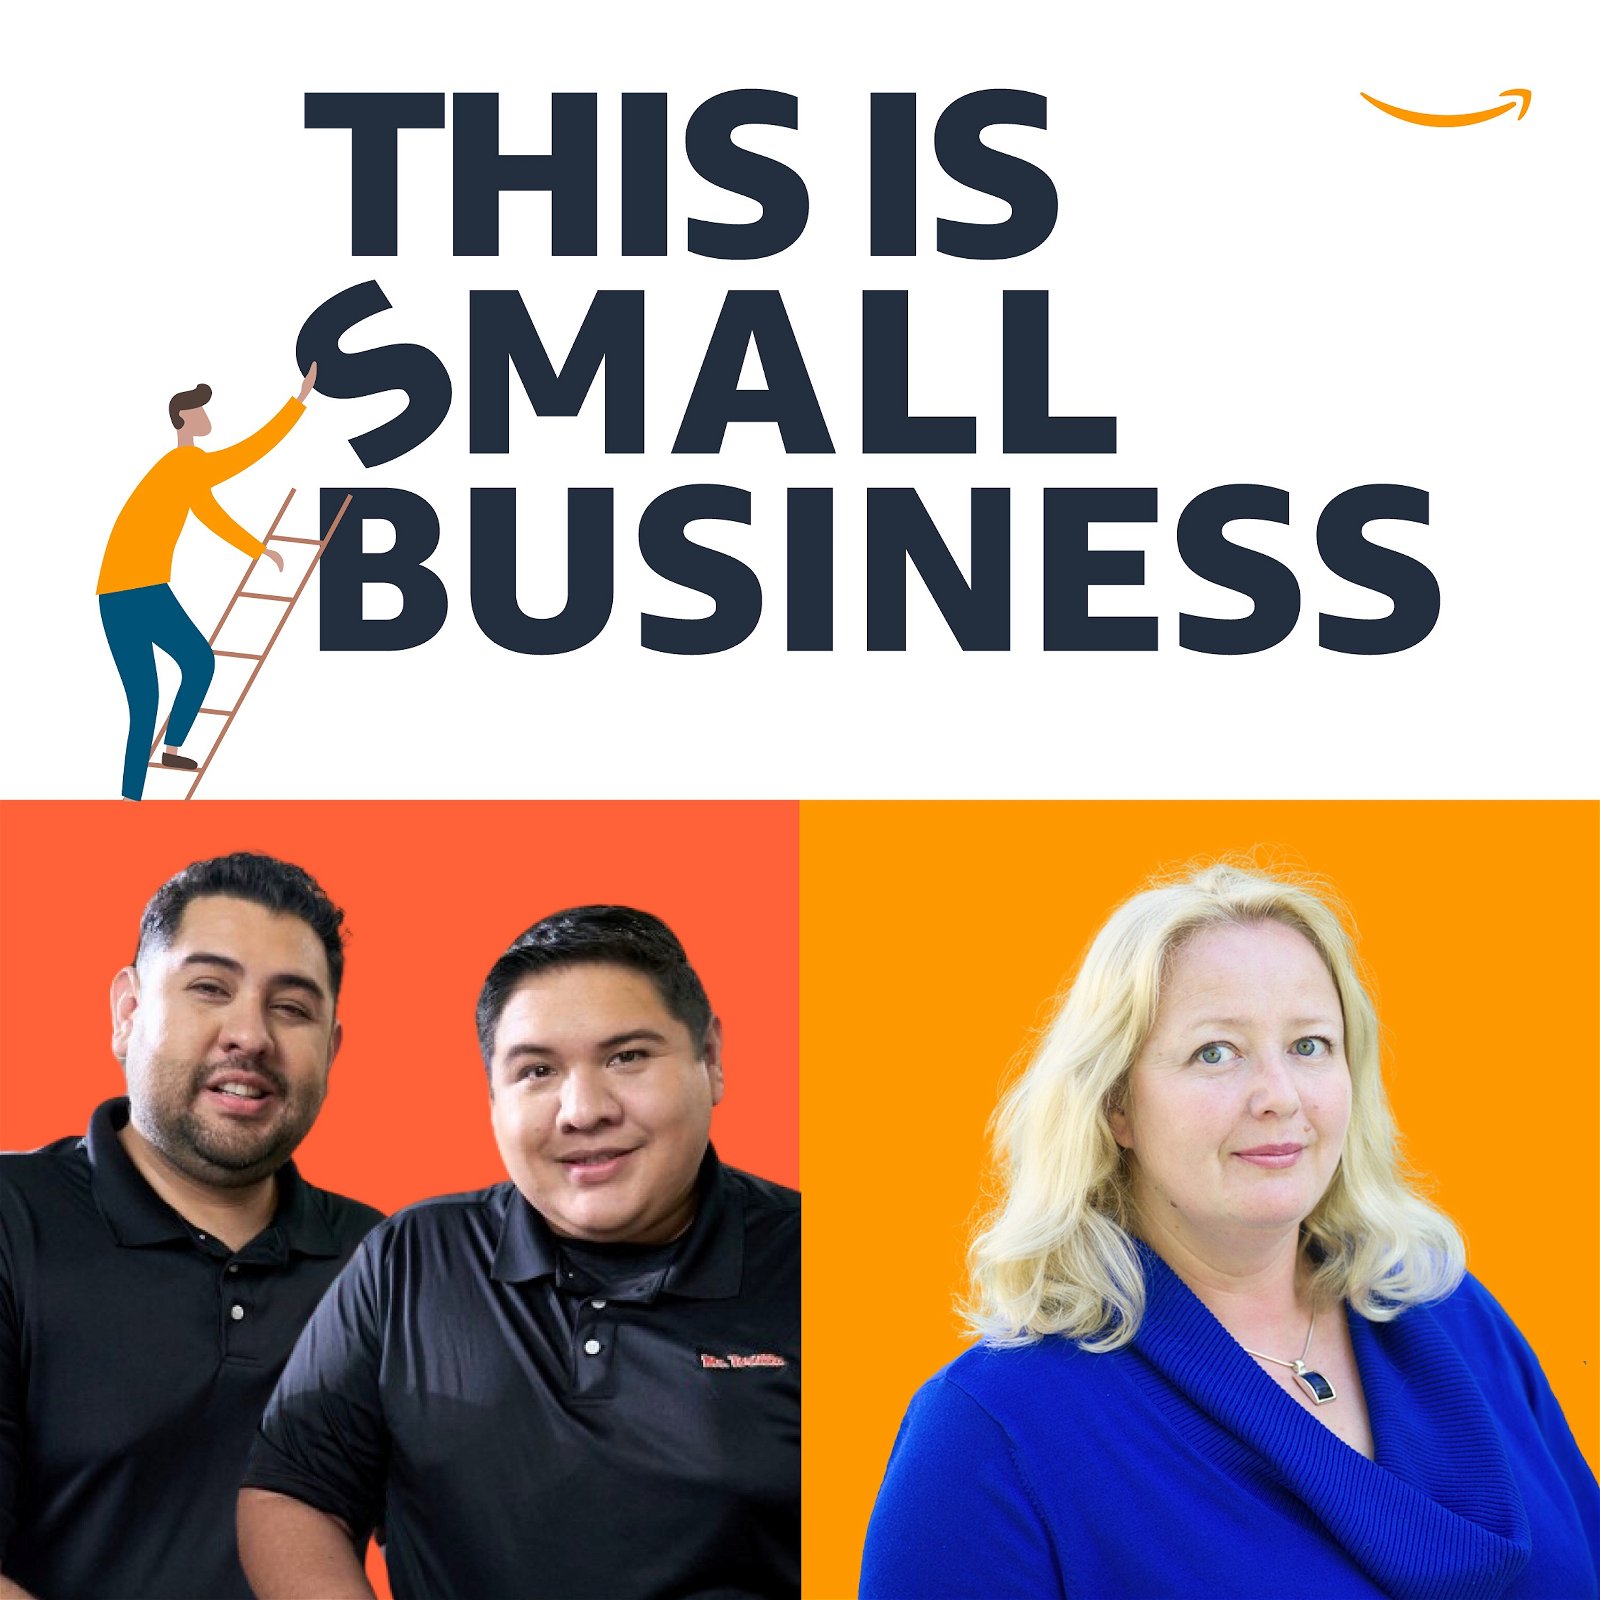 How a Small Business Owner Can Do More for Their Employees